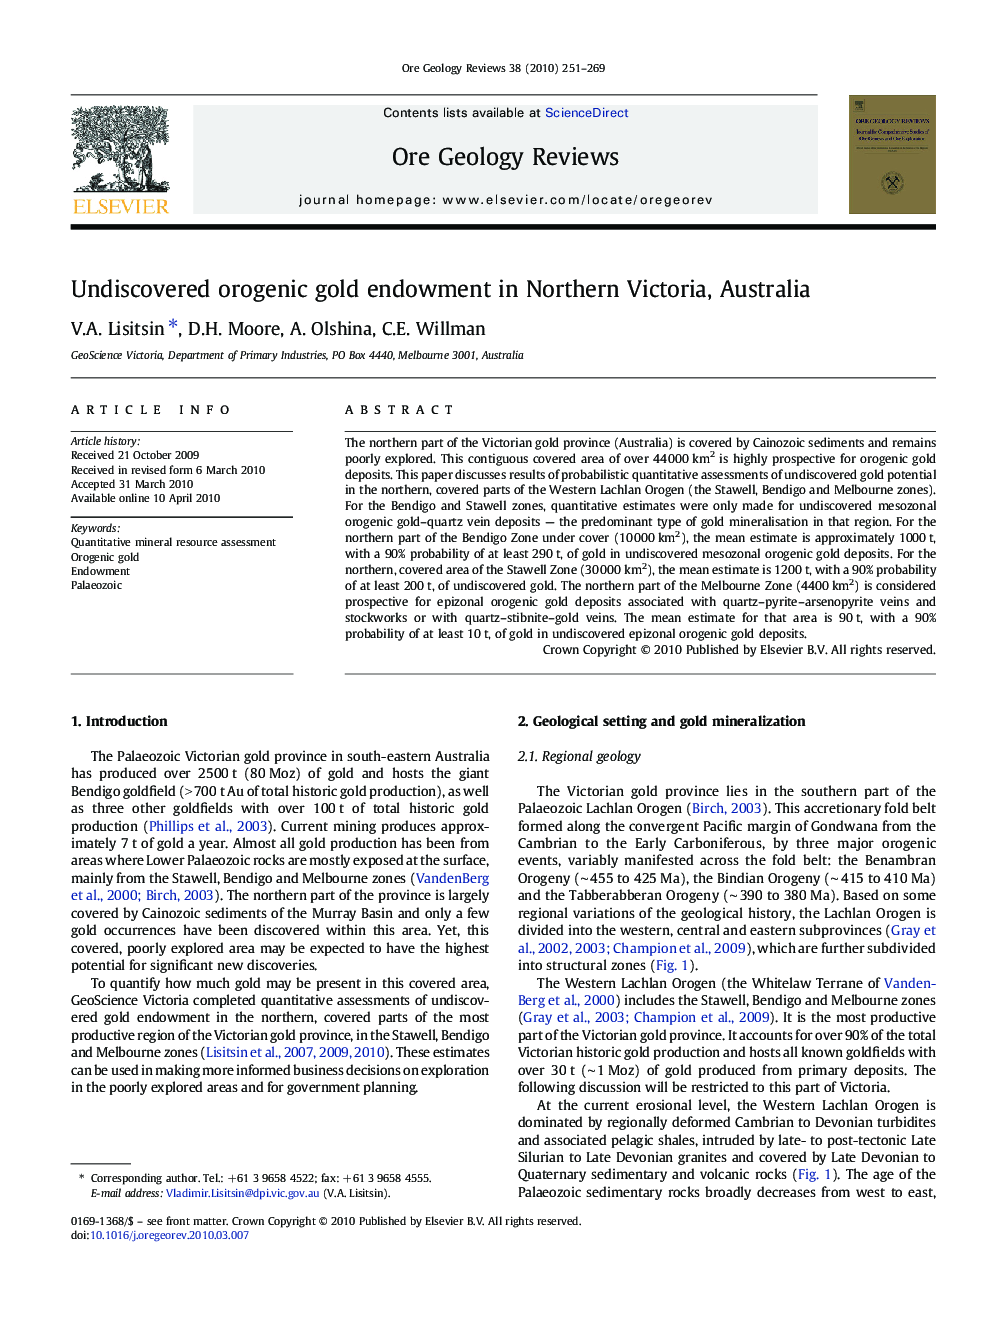 Undiscovered orogenic gold endowment in Northern Victoria, Australia